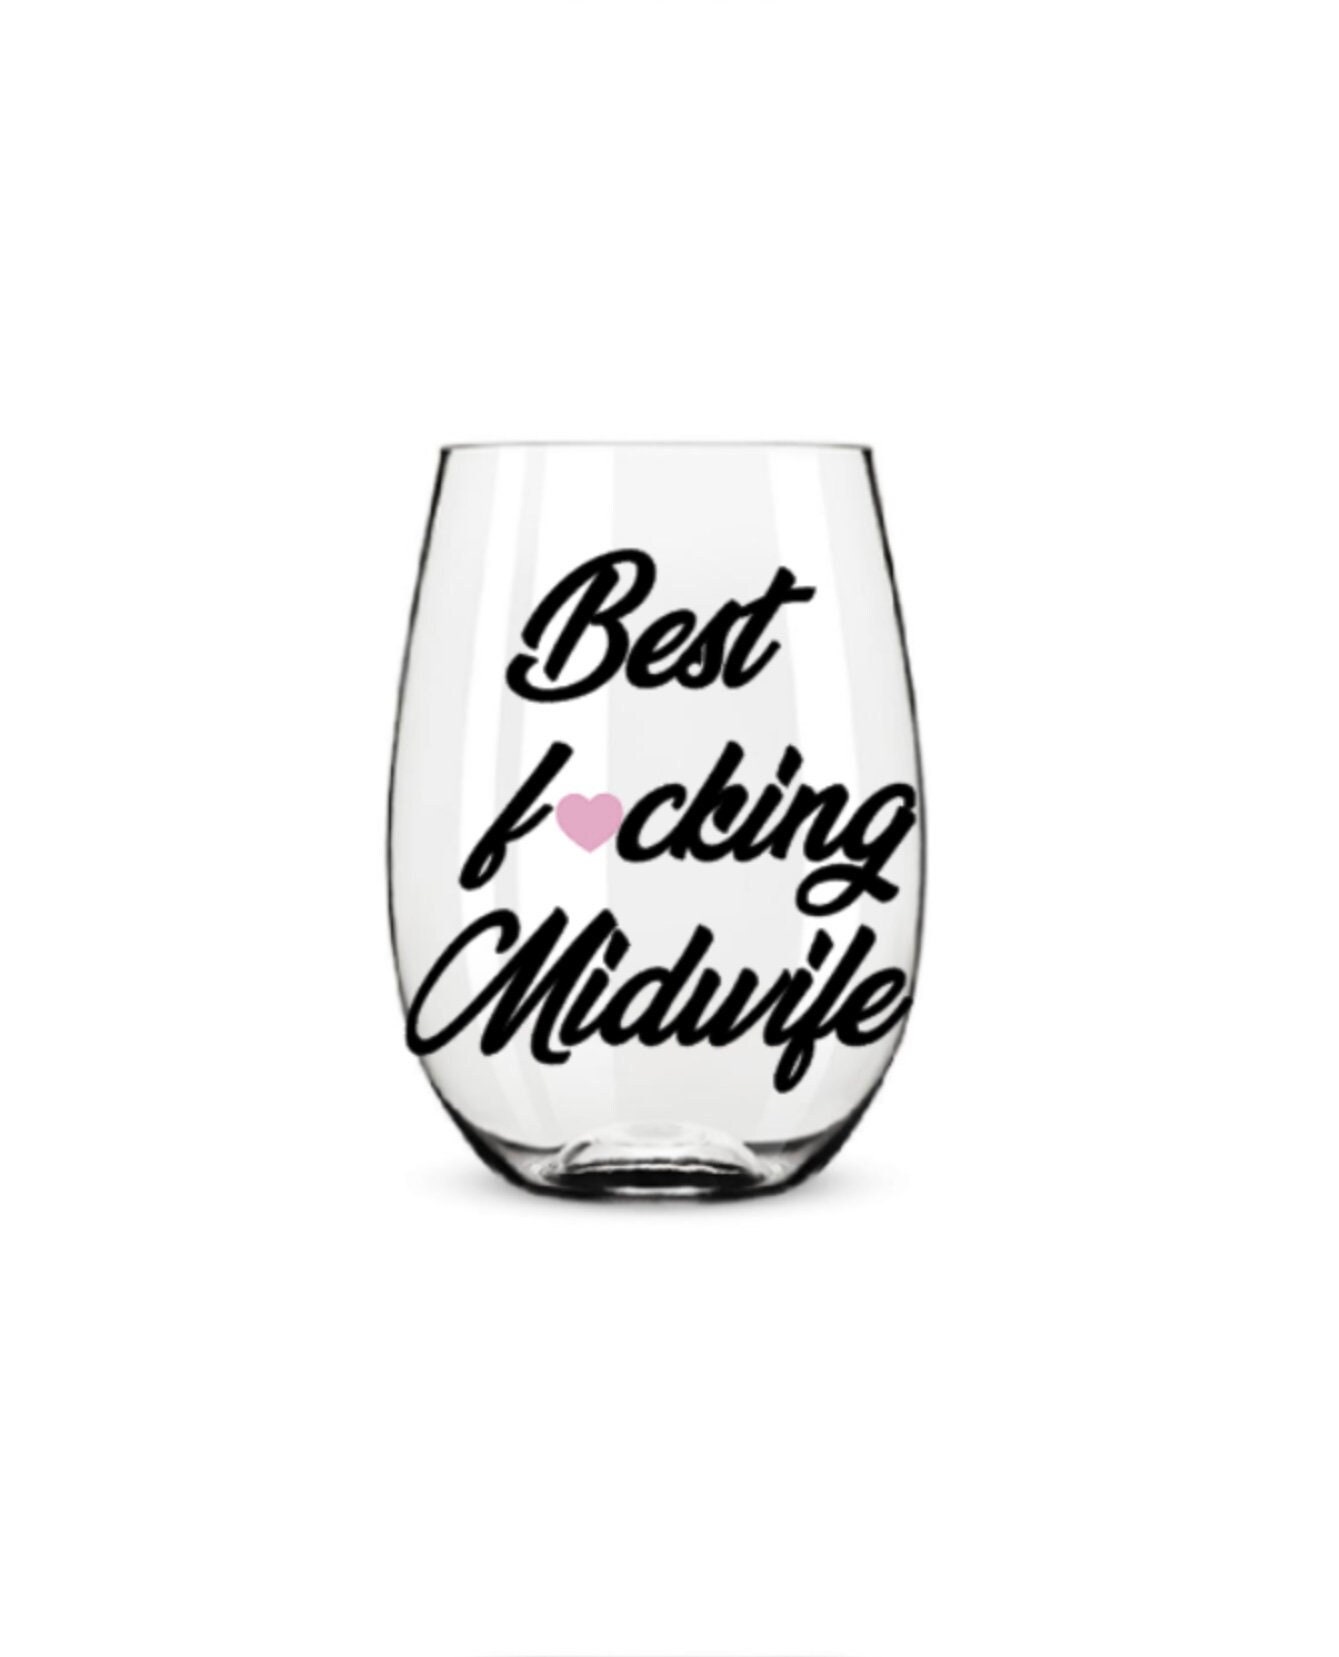 Midwife Gift. Midwife Wine Glass picture